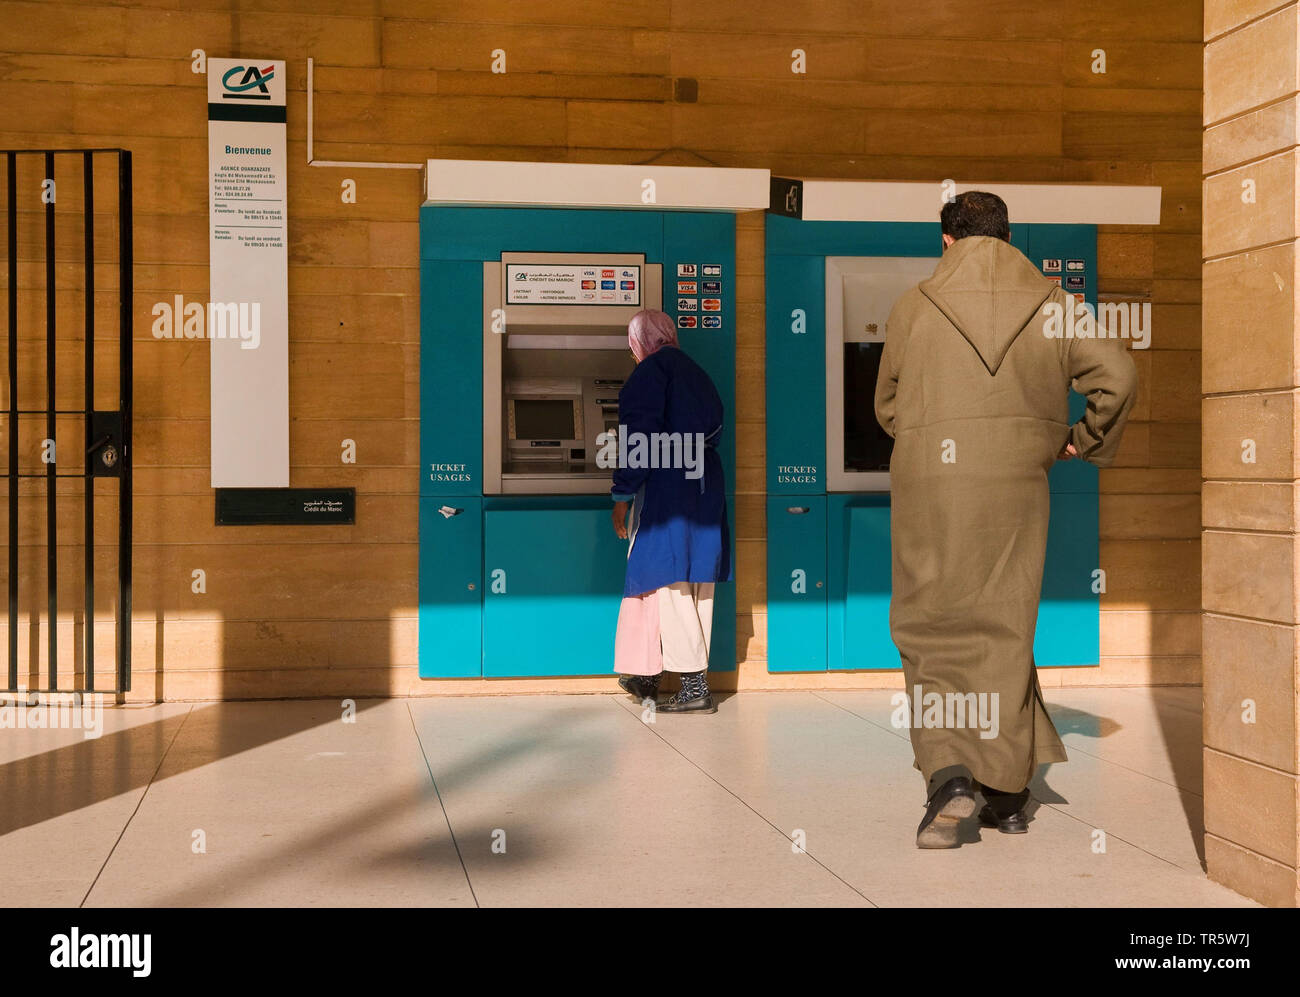 woman with headscarf and man at an automatic cash dispensers, Morocco, Quarzazate Stock Photo